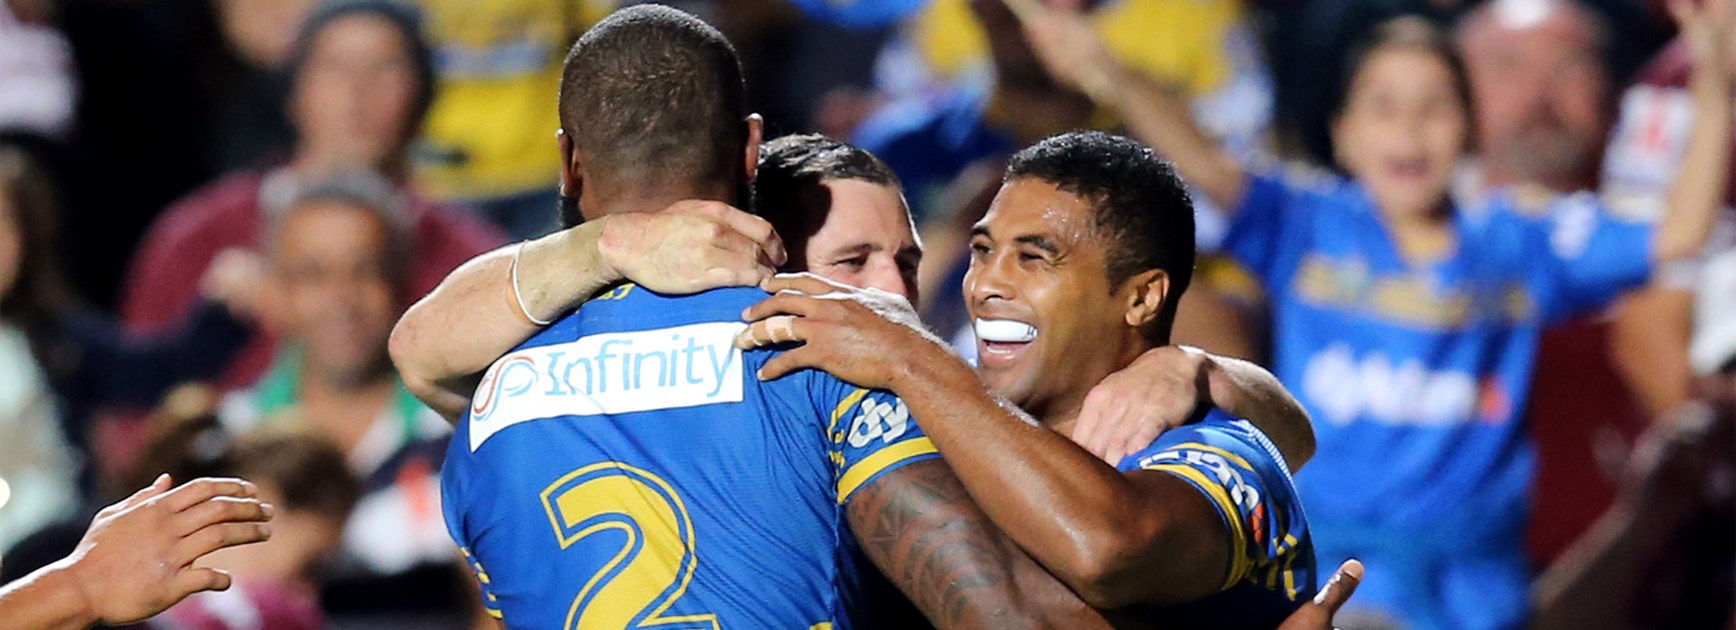 The Eels celebrate Michael Jennings' second try in his 200th NRL game.